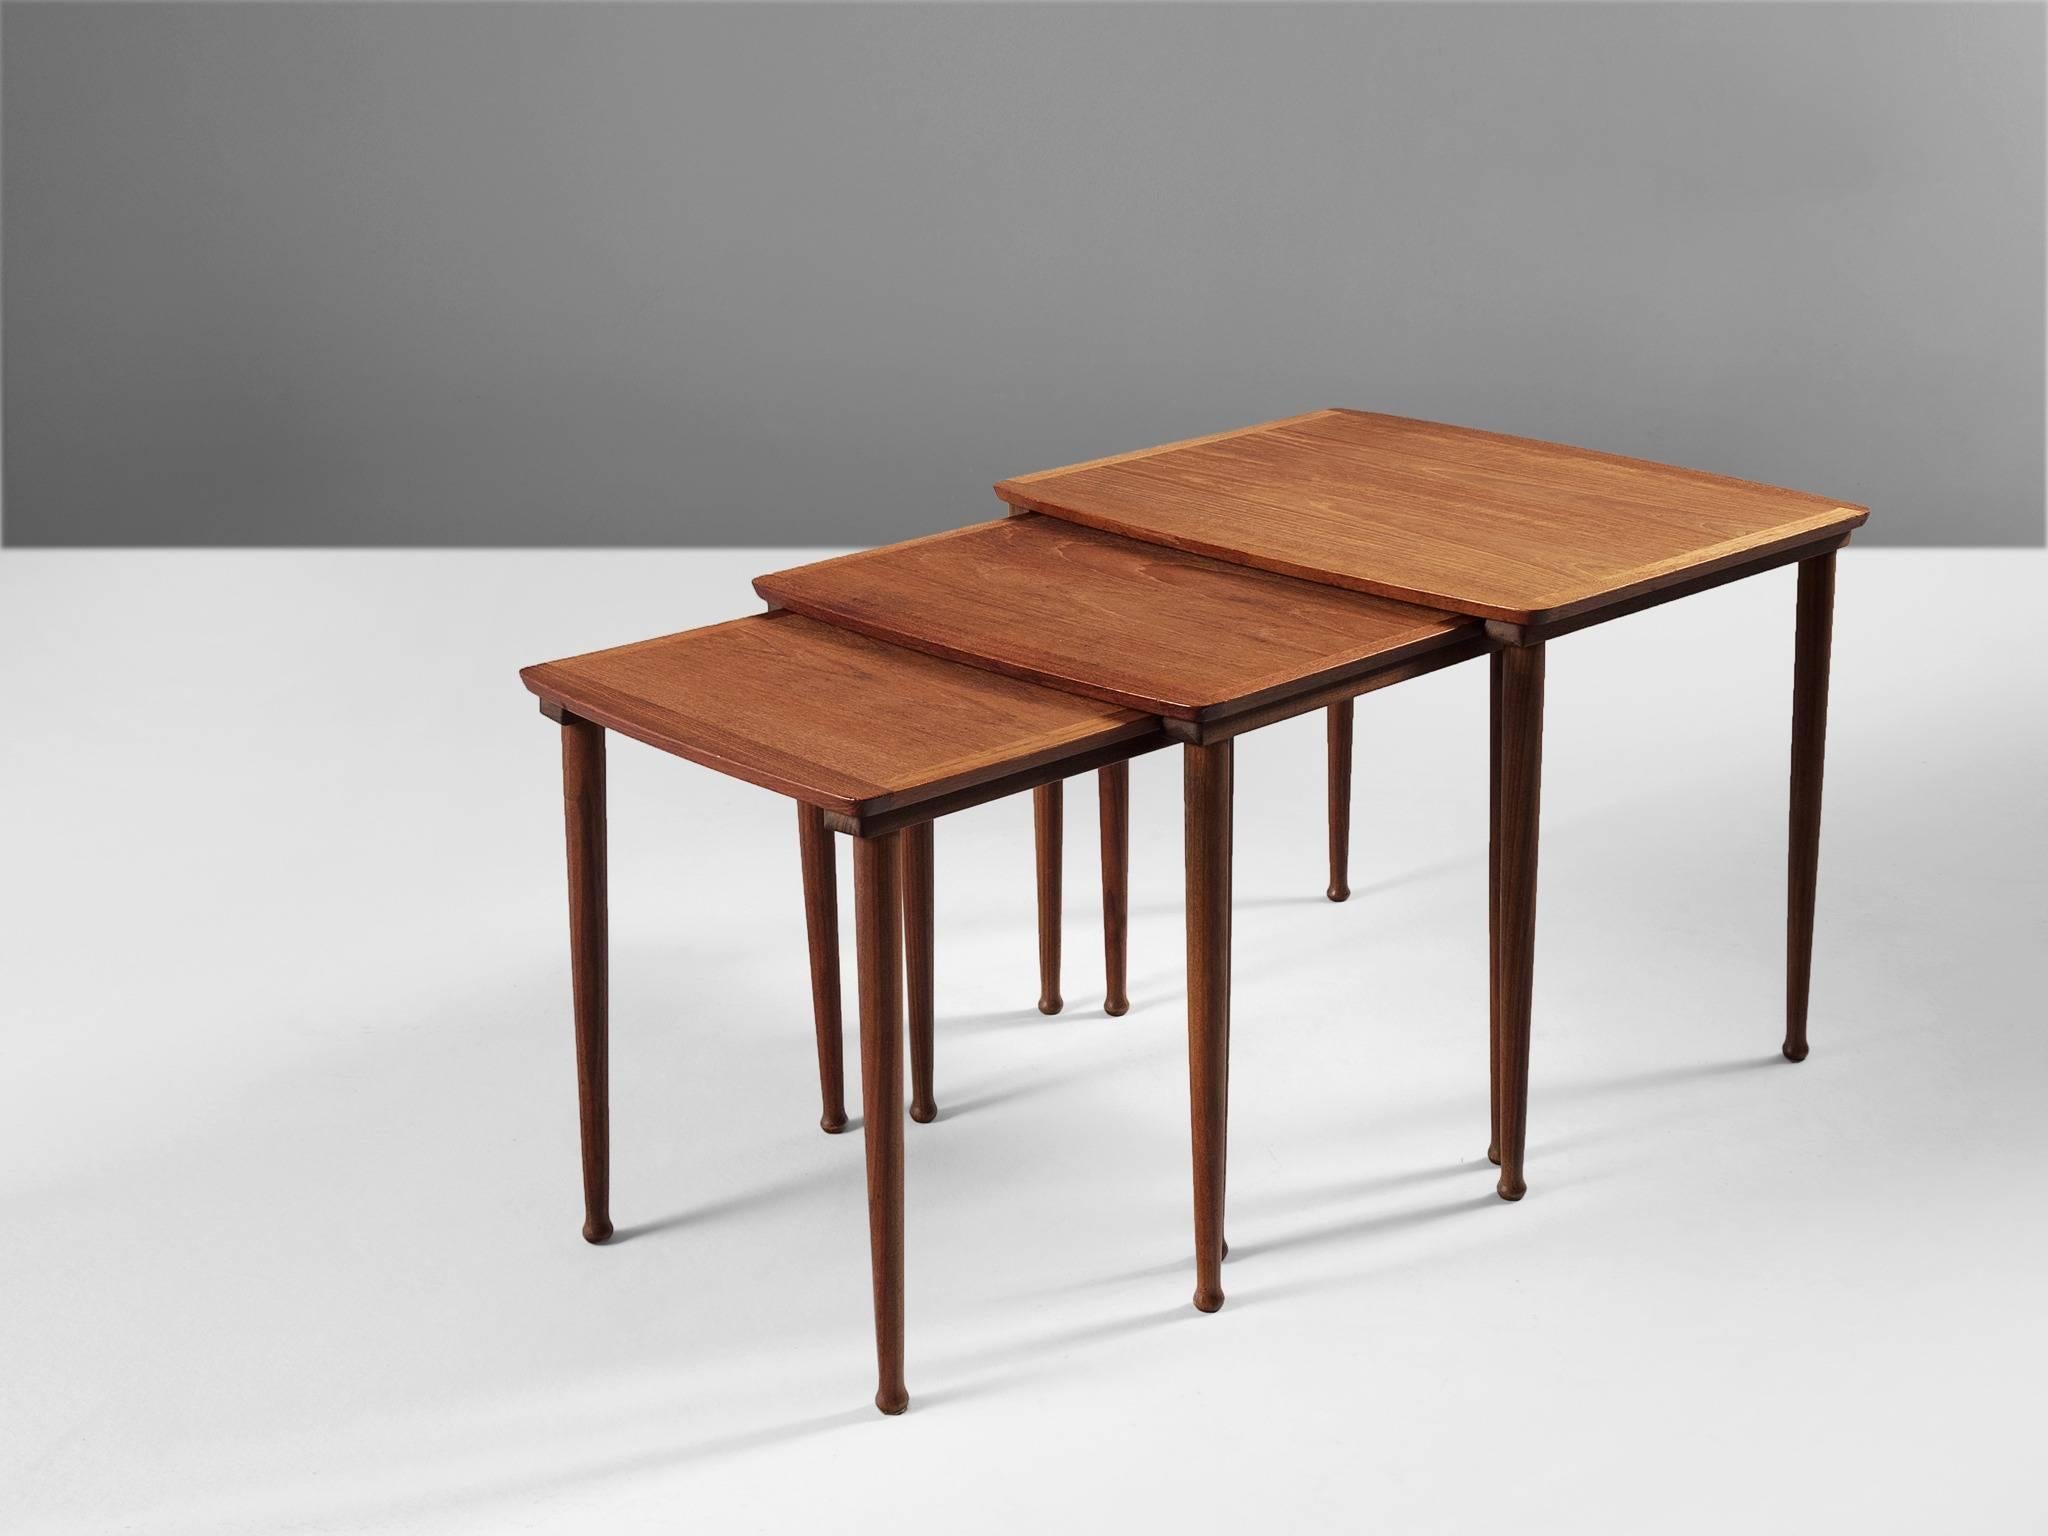 Set of three nesting tables, in teak, Scandinavia, 1950s.

Elegant set of three nesting tables. Each tables has a rectangular top with a nice trim. The cylindrical legs are tapered with a round thickening at the end. The teak has a beautiful warm